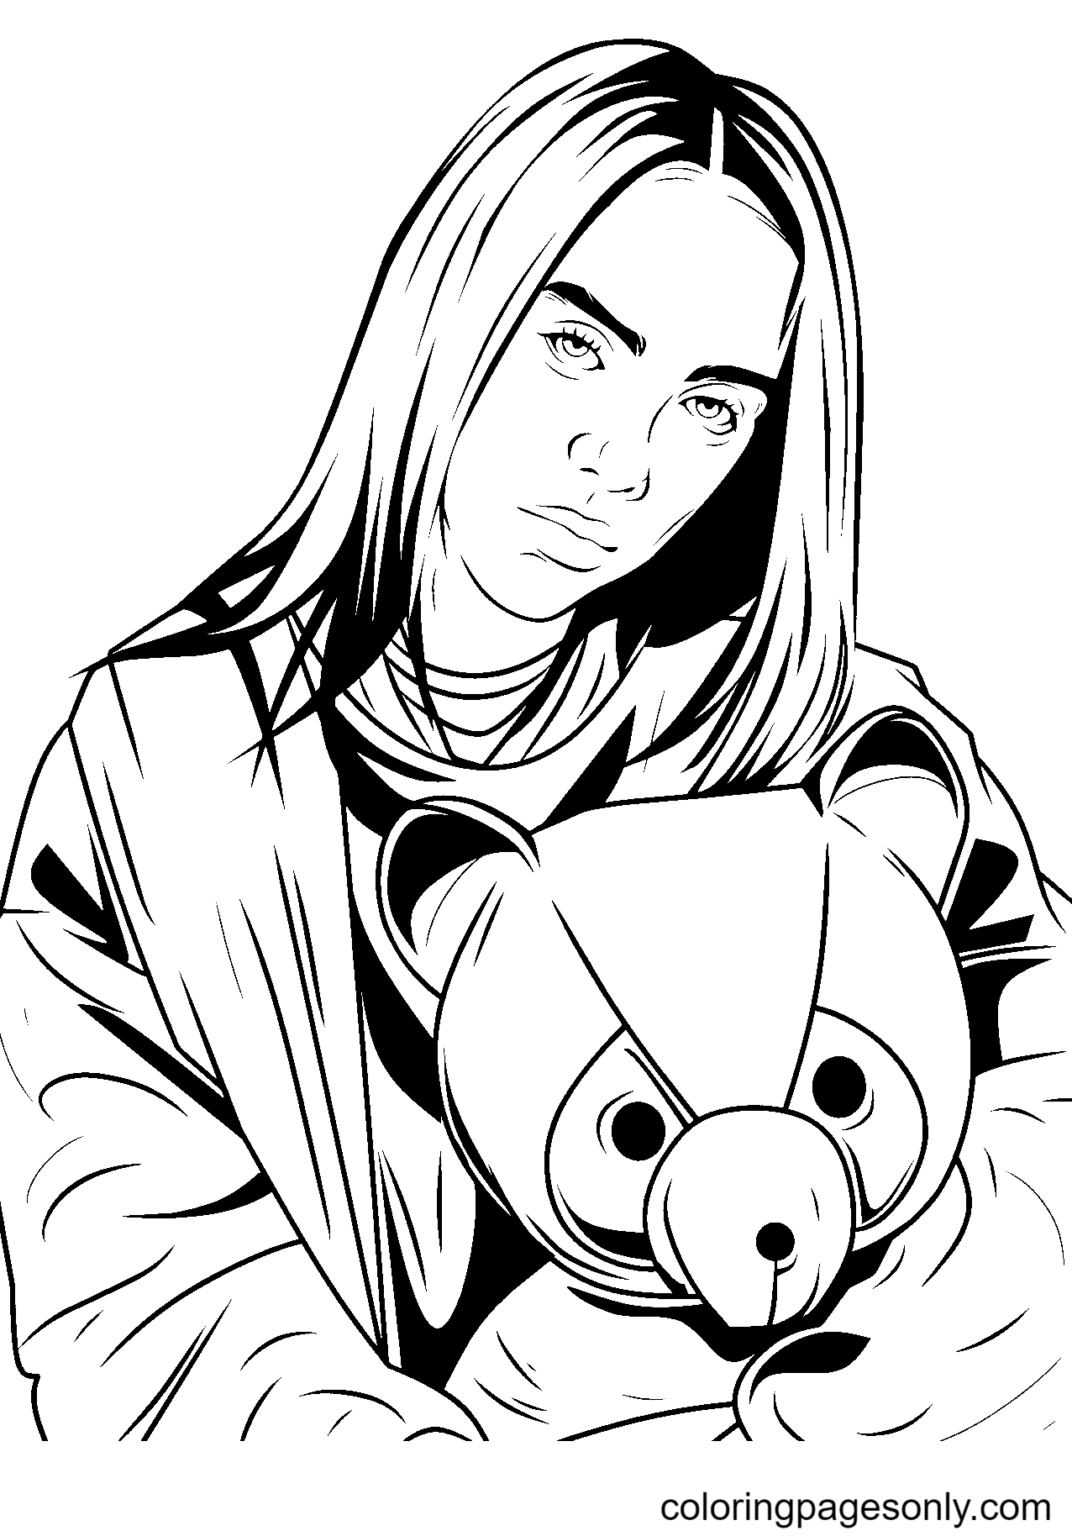 Billie Eilish Coloring Pages Printable For Free Download